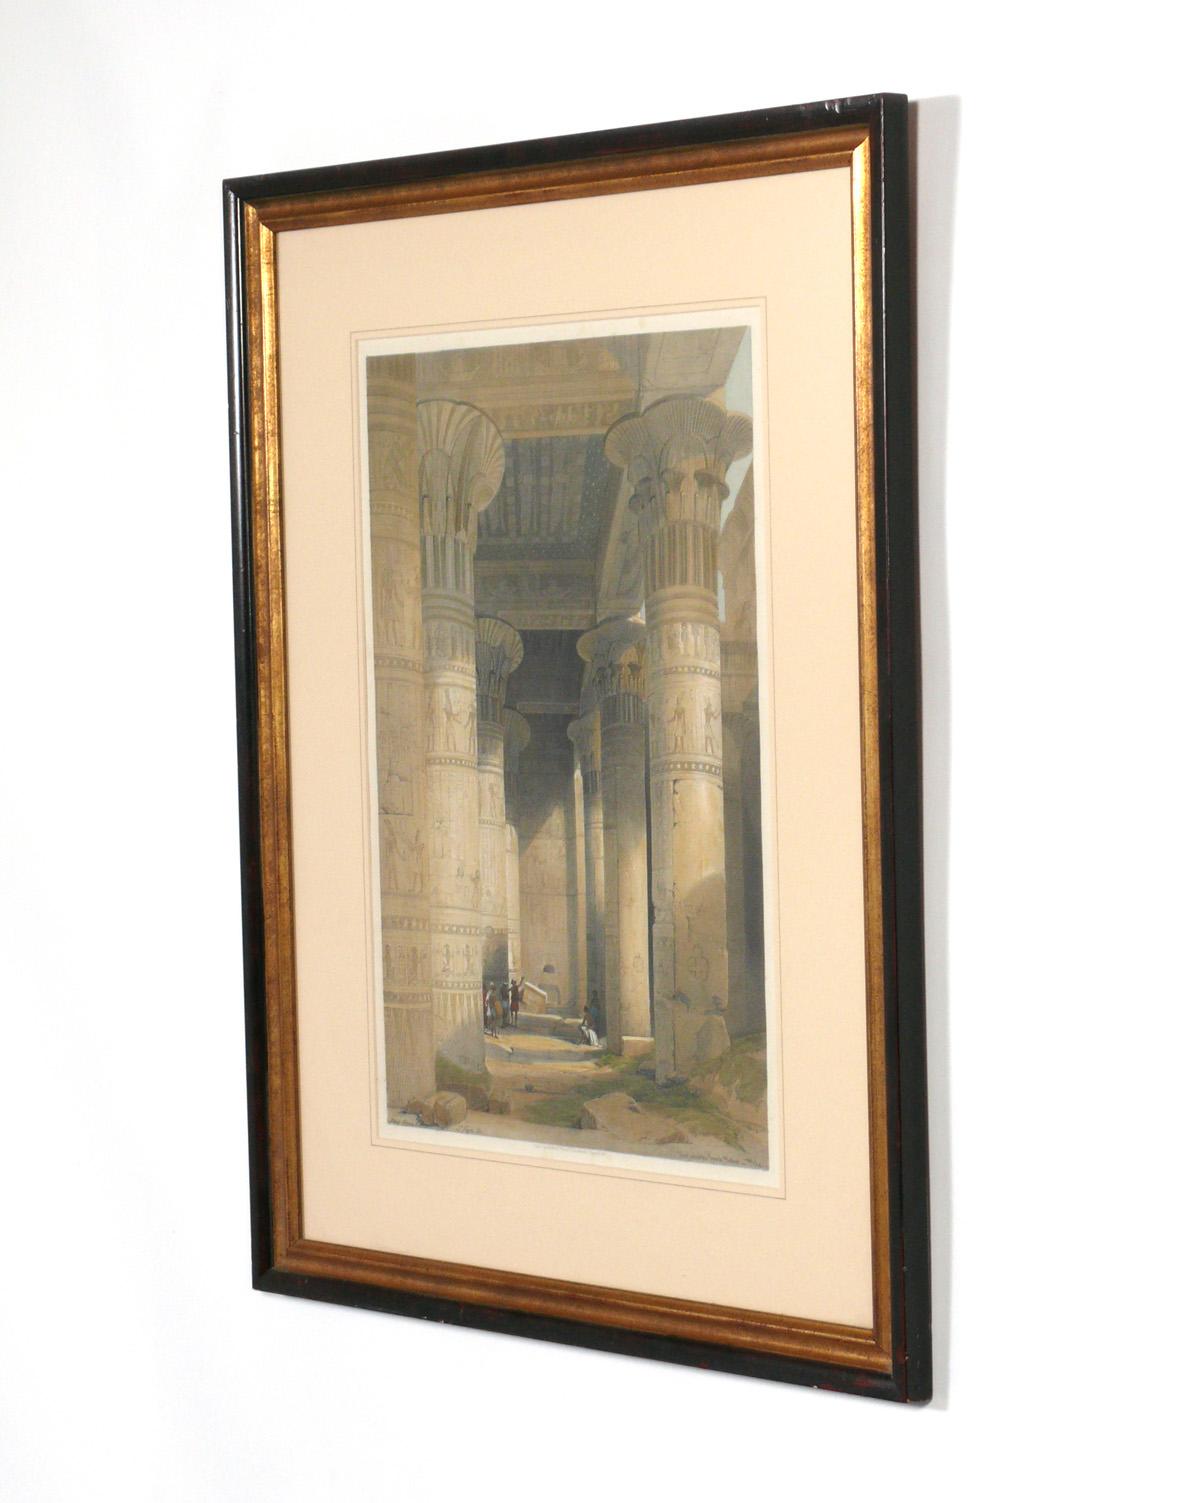 Egyptian David Roberts Egypt Lithographs Hand Colored